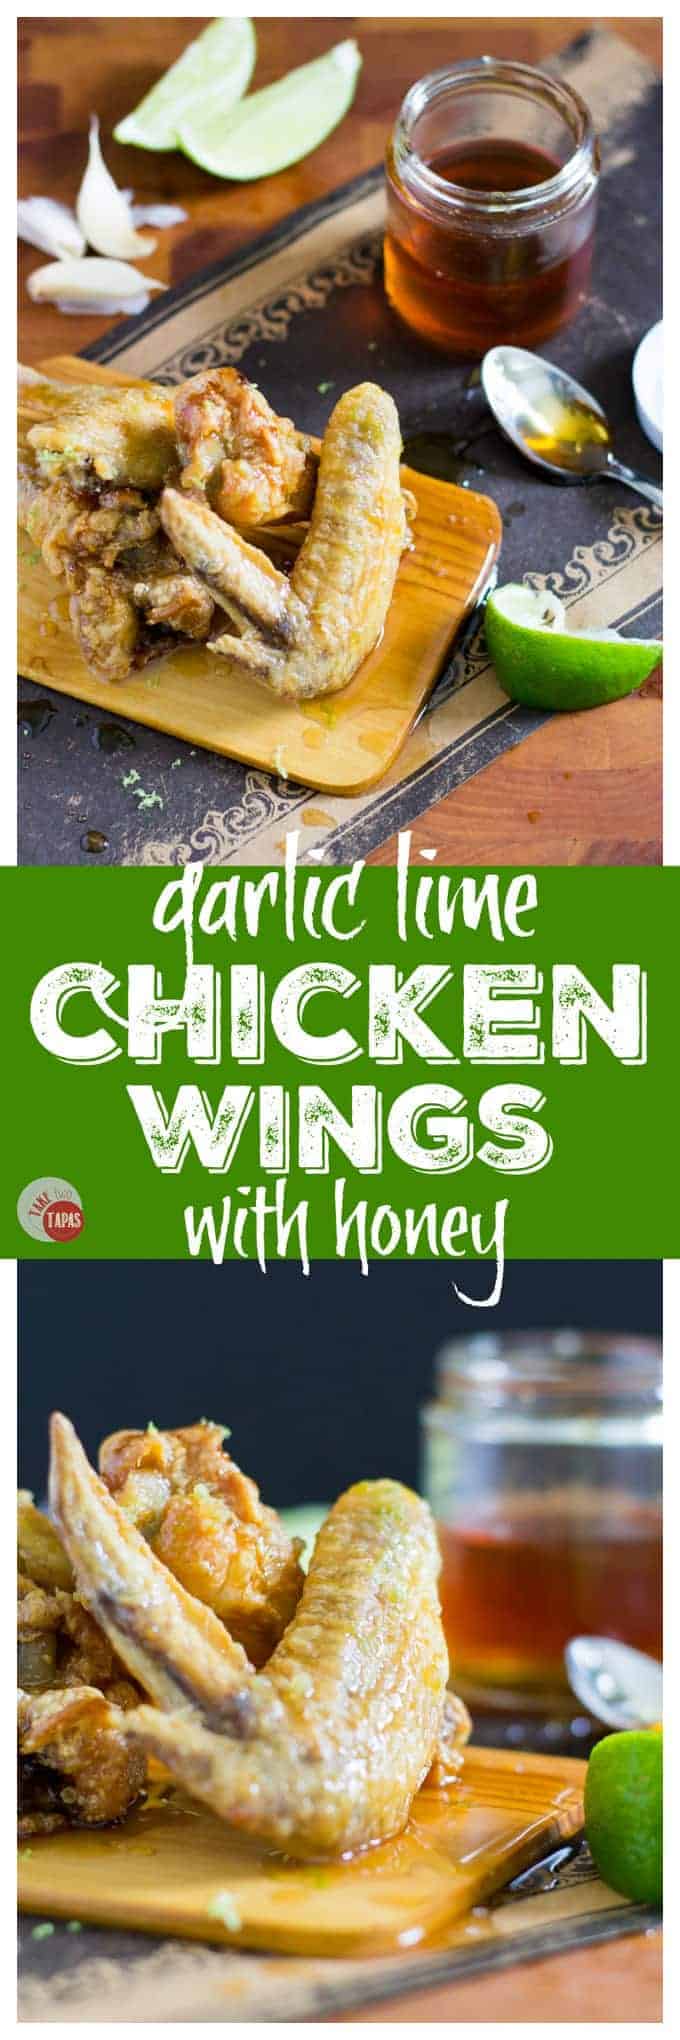 Pinterest collage image with text "Garlic Lime Chicken Wings with Honey"